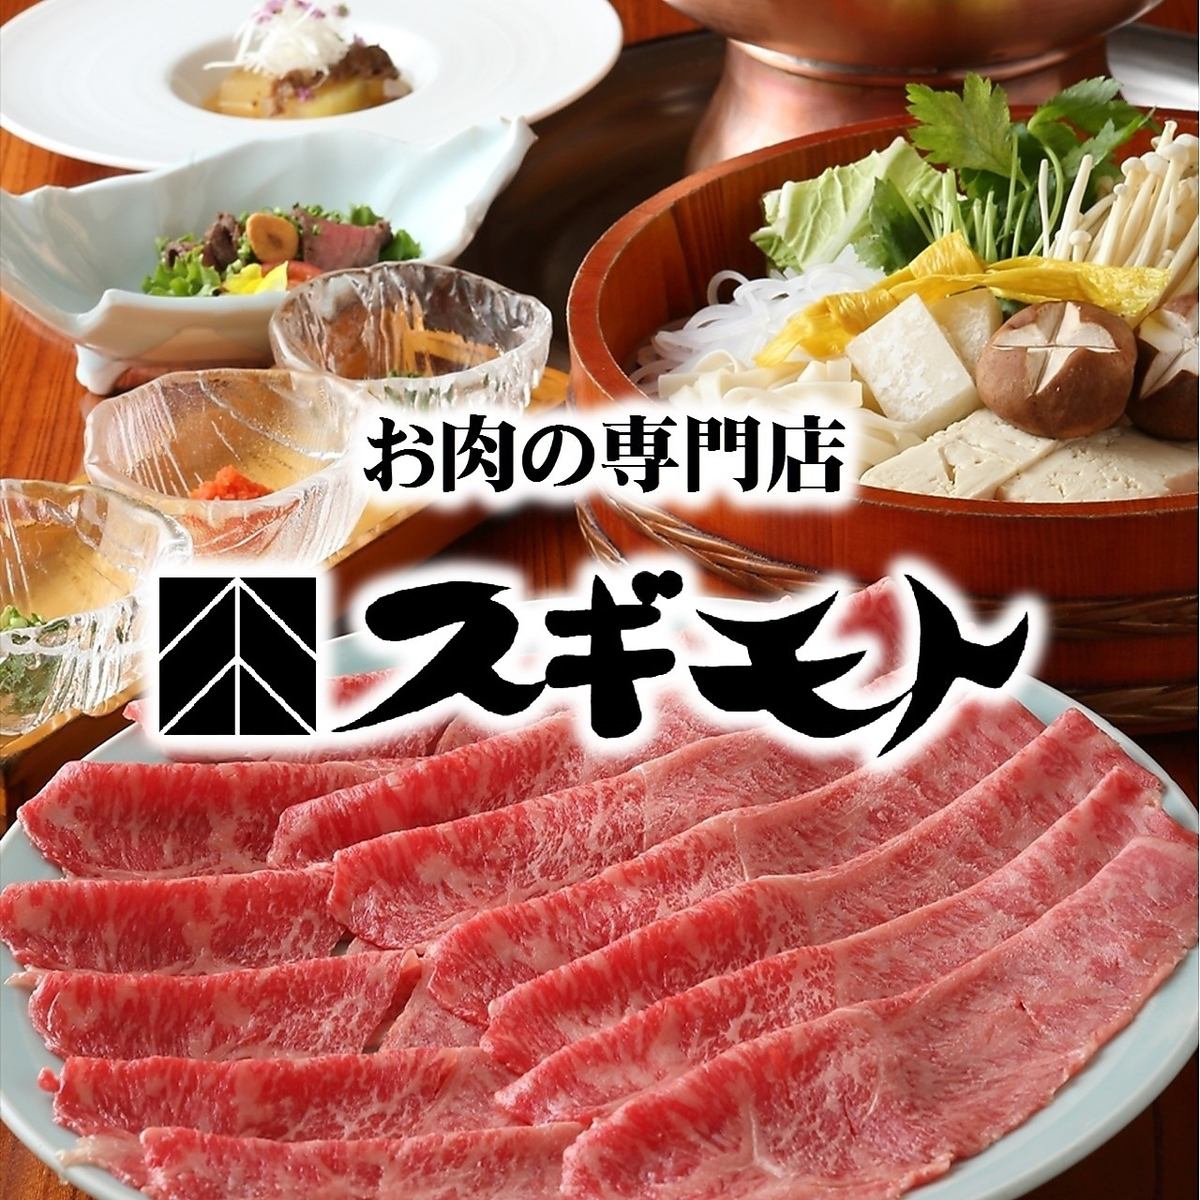 A long-established meat specialty store that has been in business for over 120 years.Only the highest grade of carefully selected high quality Wagyu beef is used.